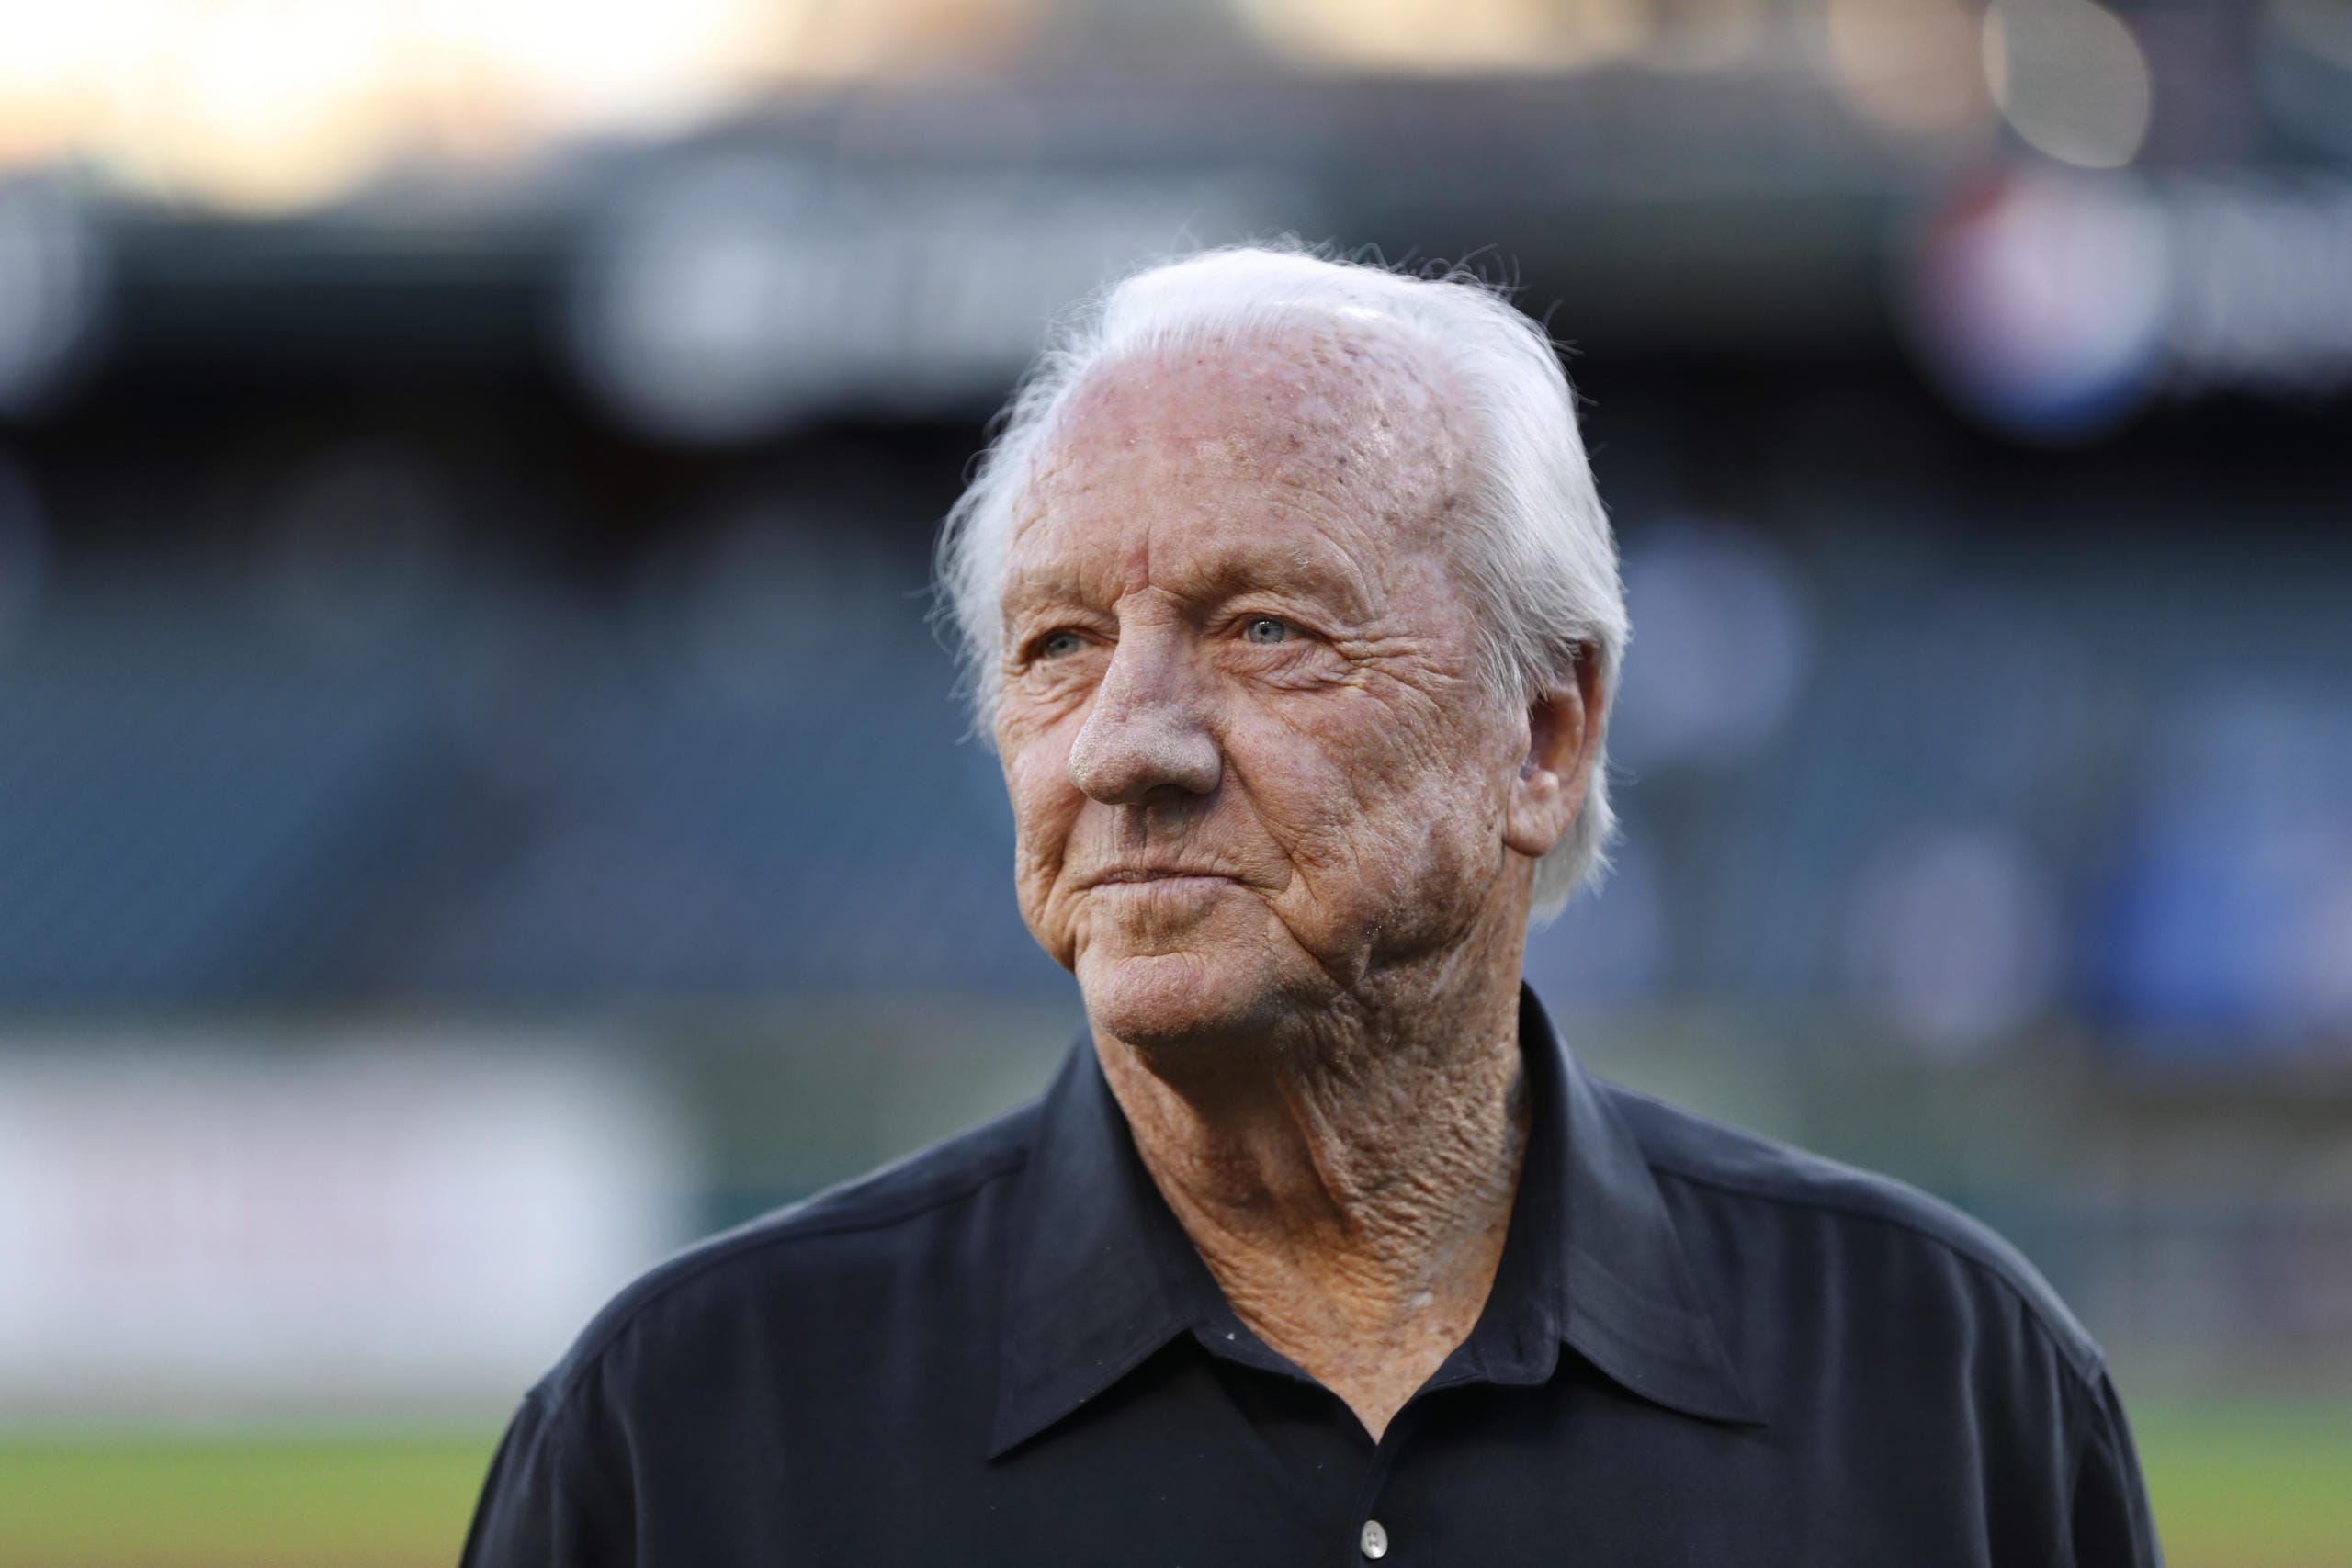 Al Kaline, Hall of Fame player and Detroit Tigers special assistant to the general manager pictured here in 2006, has died. He became the youngest player to win the American League batting title in 1955 and was a 15-time All-Star. Known as "Mr. Tiger," Kaline also won 10 Gold Gloves and after his playing career ended was a Tigers broadcaster for a quarter-century. Kaline was 85.